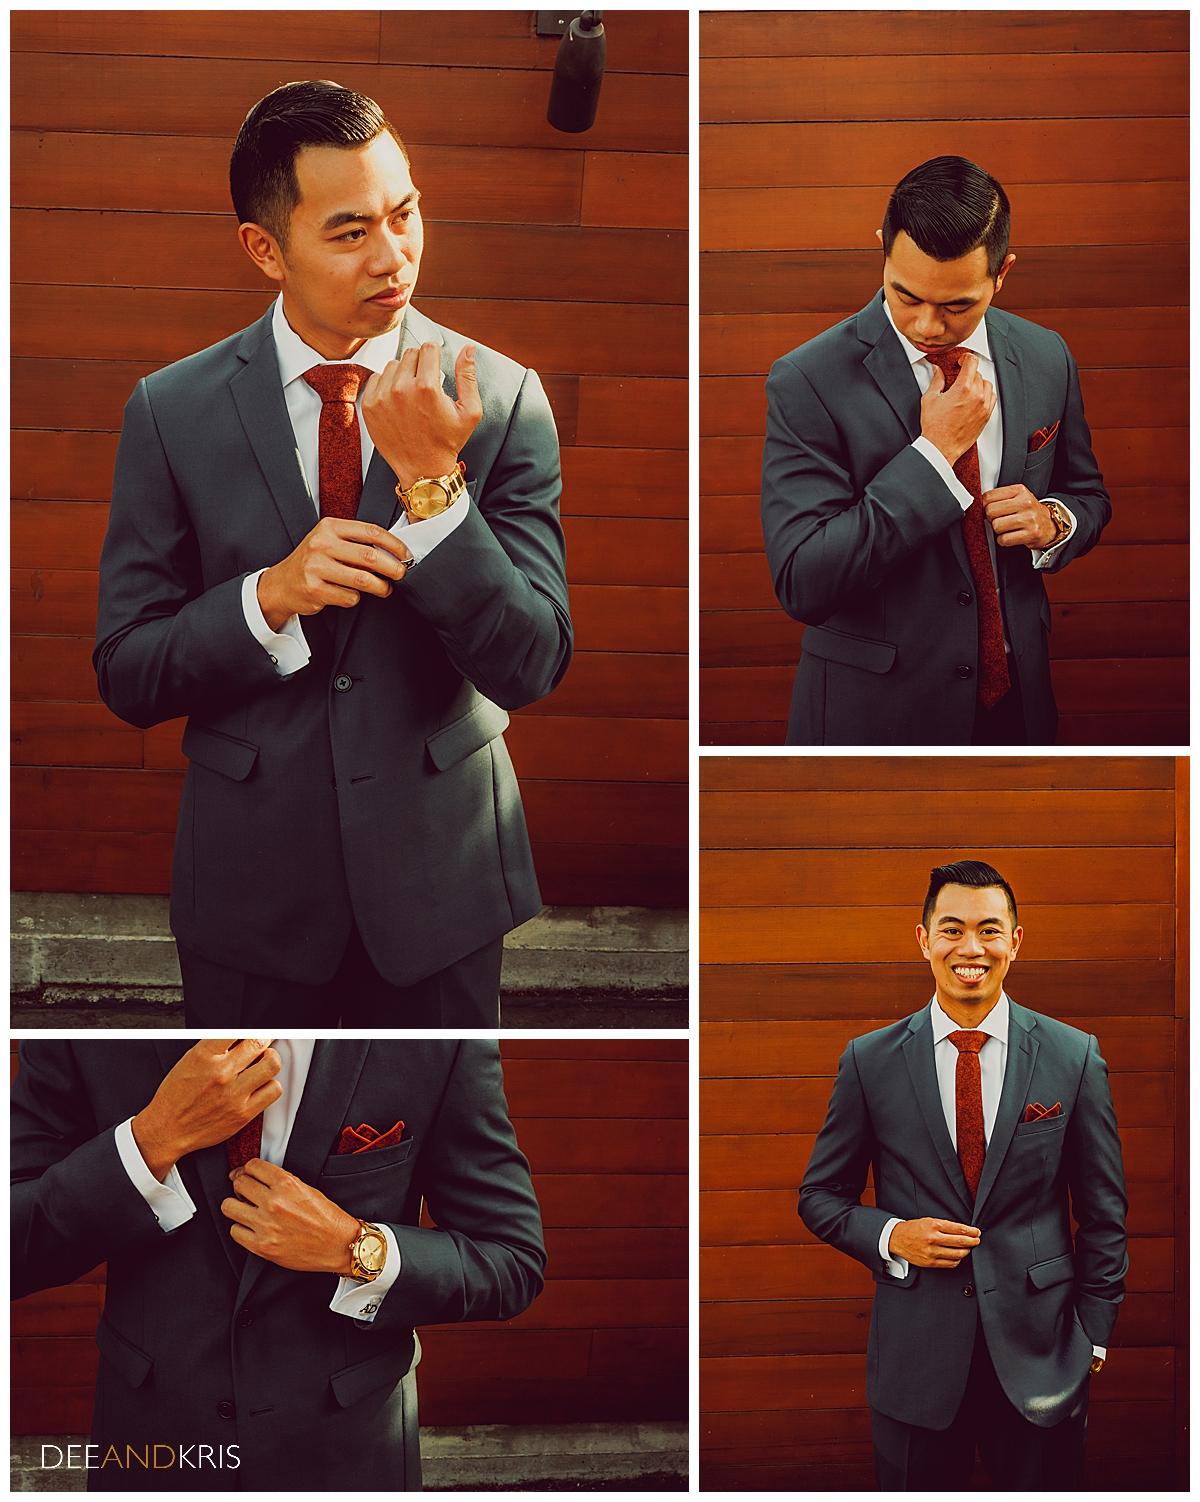 Four images: Top right images of groom adjusting cufflinks. Top right image of groom adjusting tie while looking down.  Bottom left image of groom's watch. Bottom right image of groom with hand in pocket, smiling, and looking at camera.